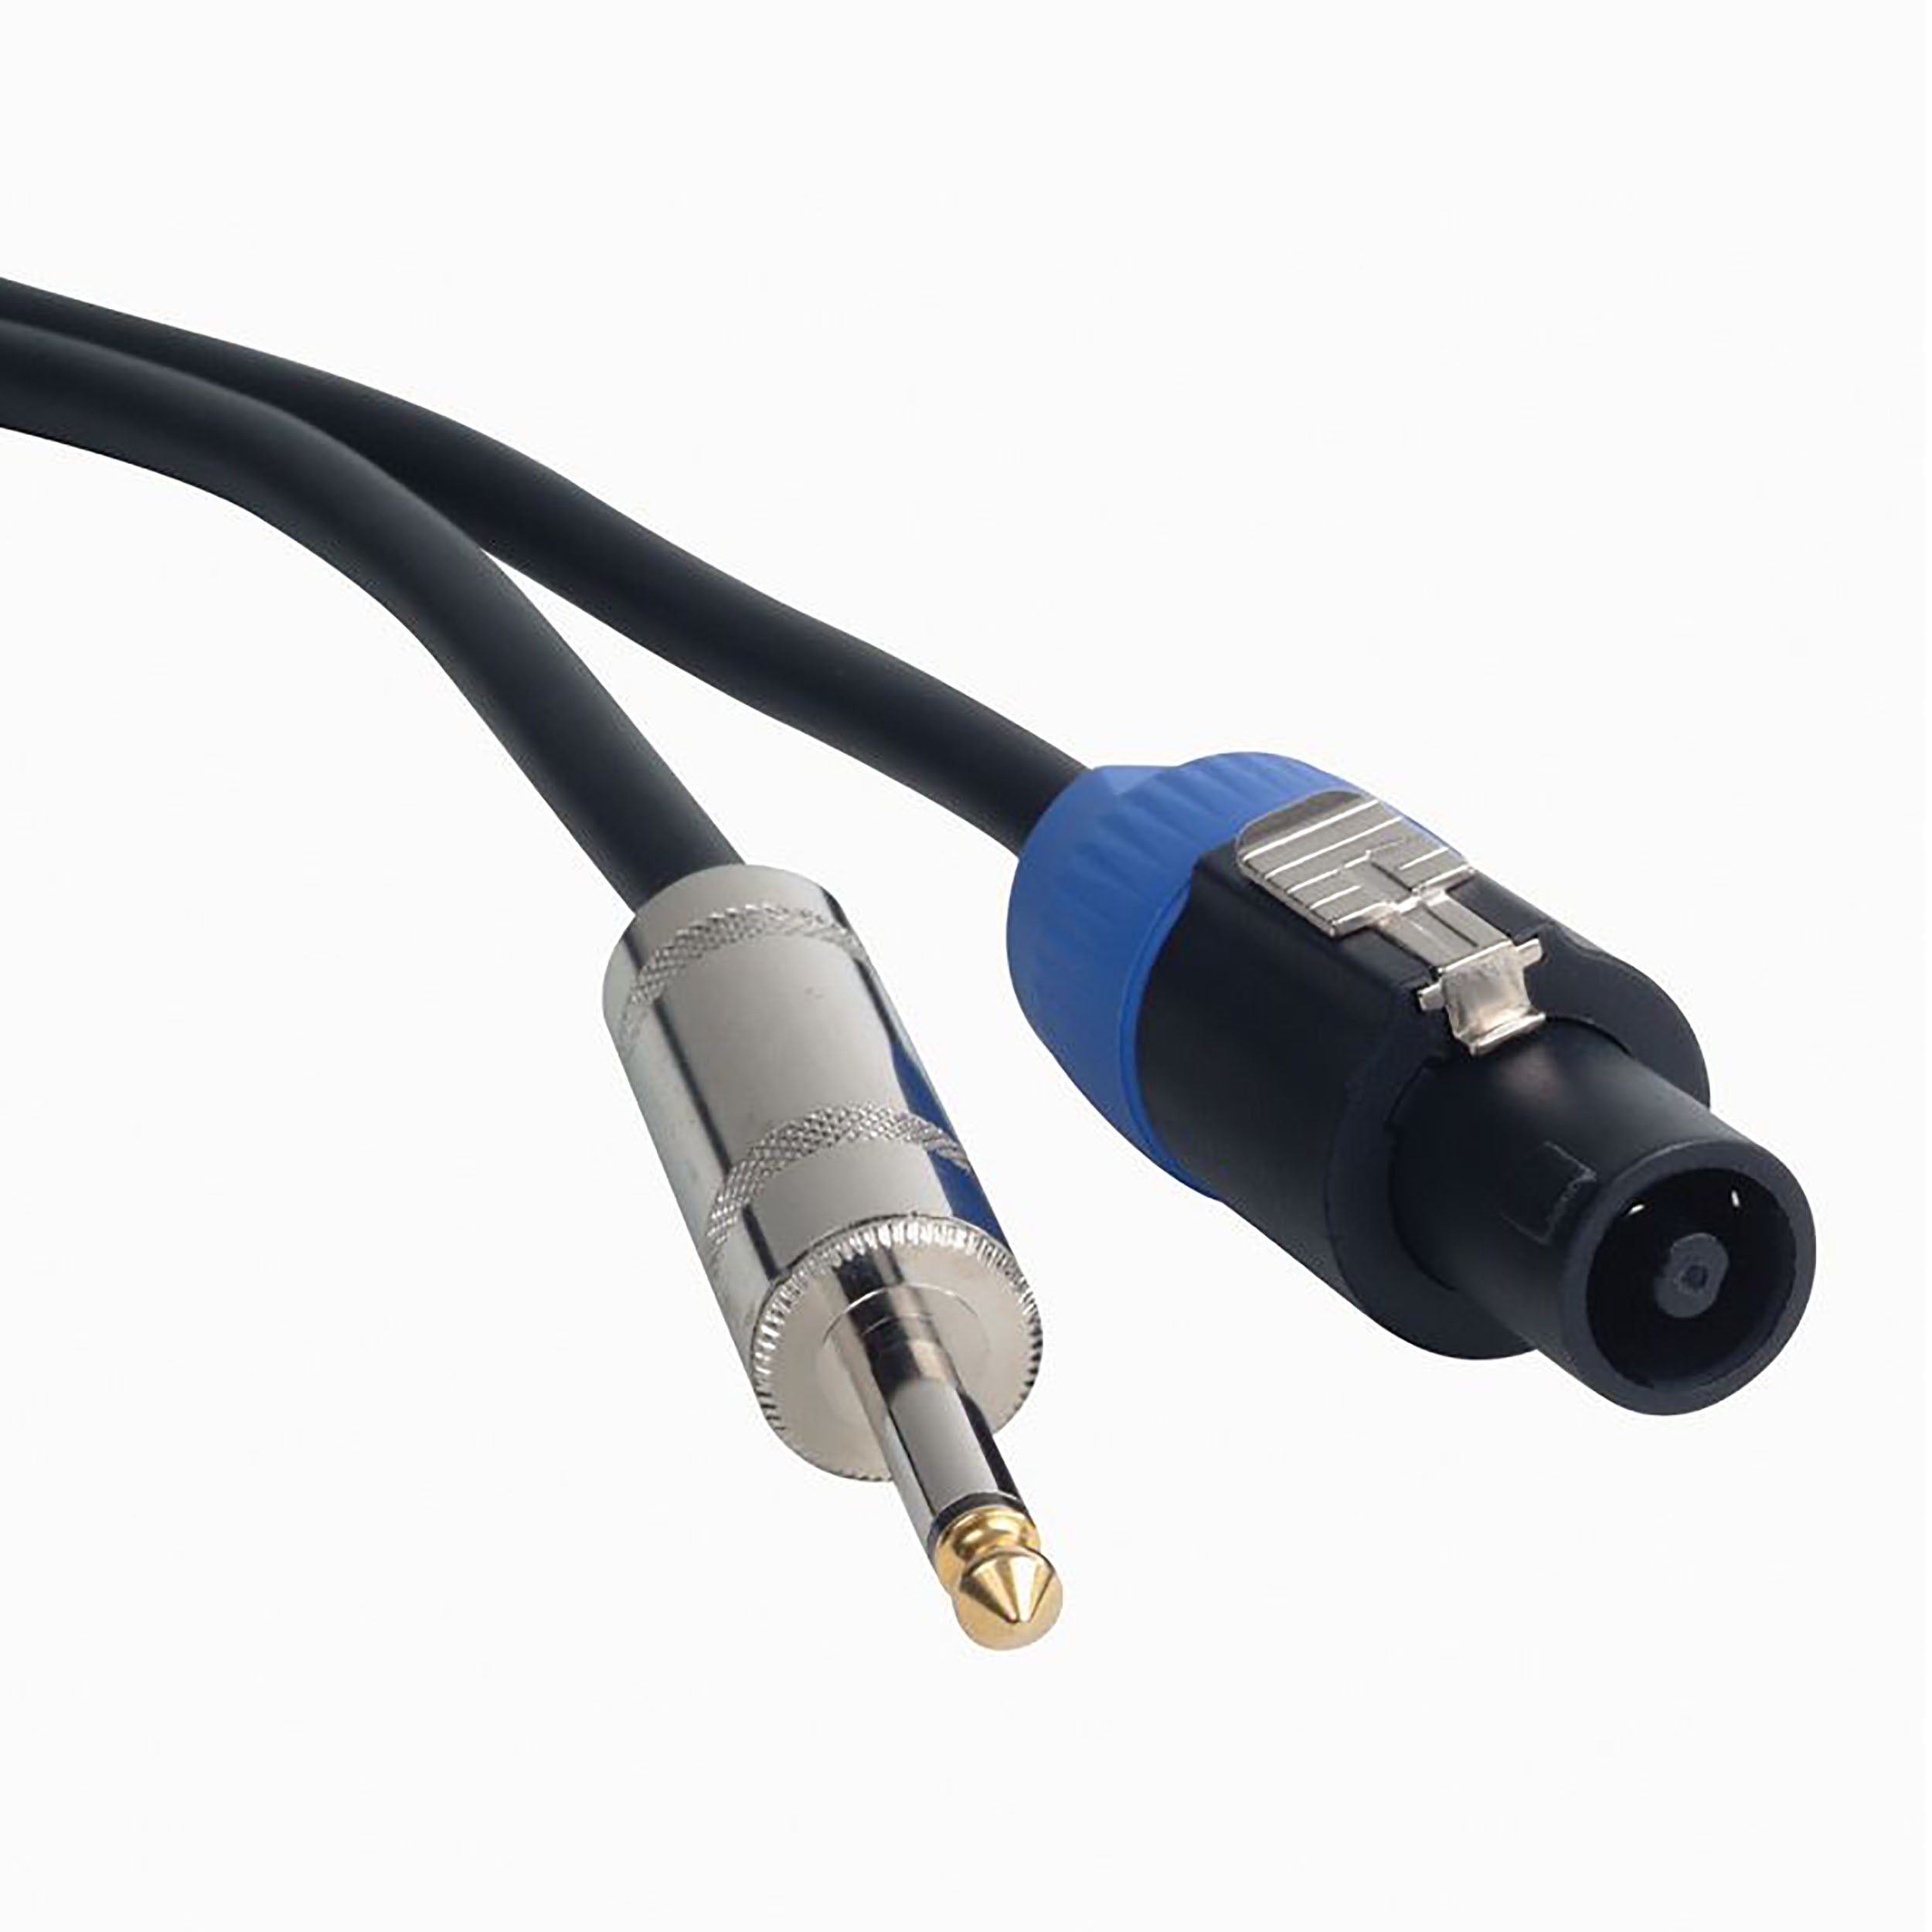 Accu-Cable SK4-5012, 12 Gauge, Locking Speaker Connector to 1/4-Inch Cable - 50 Ft by Accu Cable